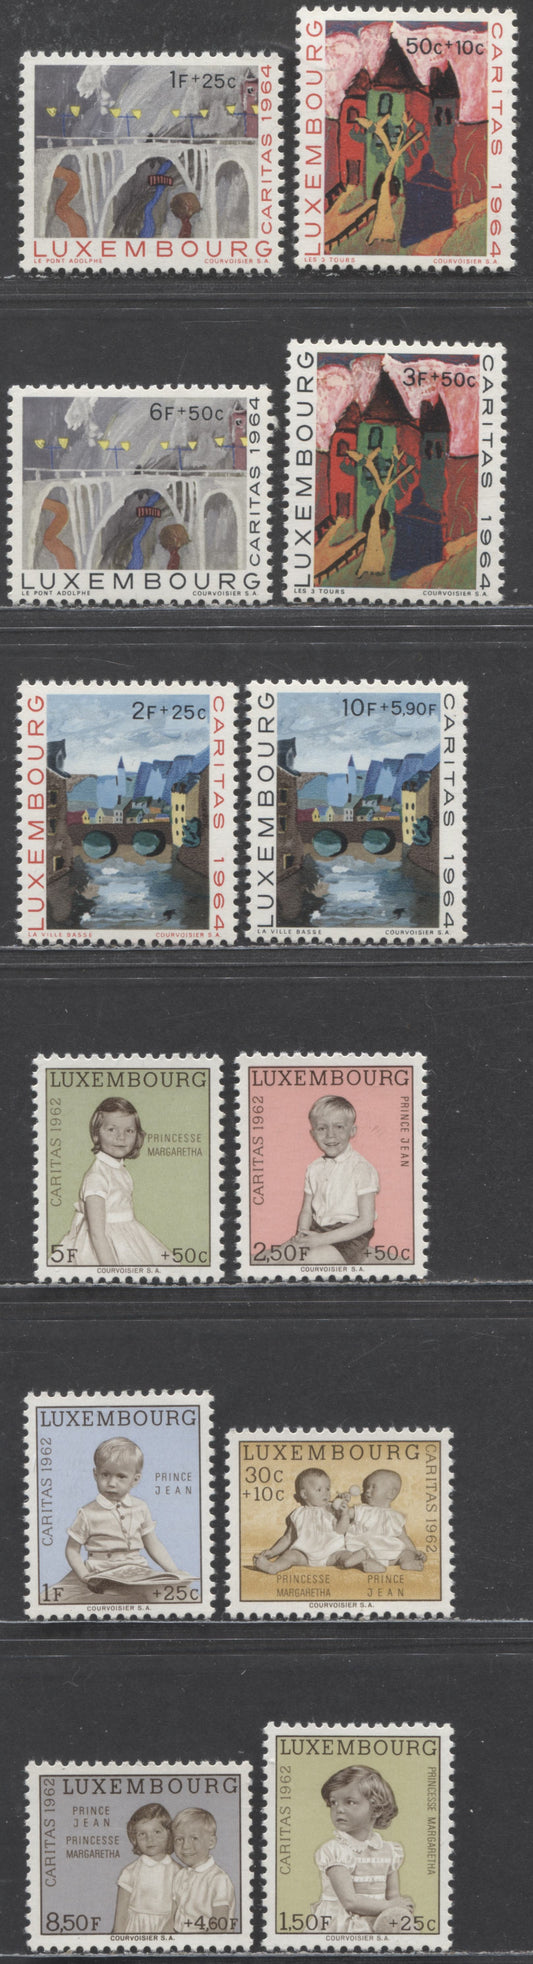 Luxembourg SC#B228/B245 1962&1964 Semi Postals, 12 VFNH Singles, Click on Listing to See ALL Pictures, 2022 Scott Classic Cat. $8.95 USD